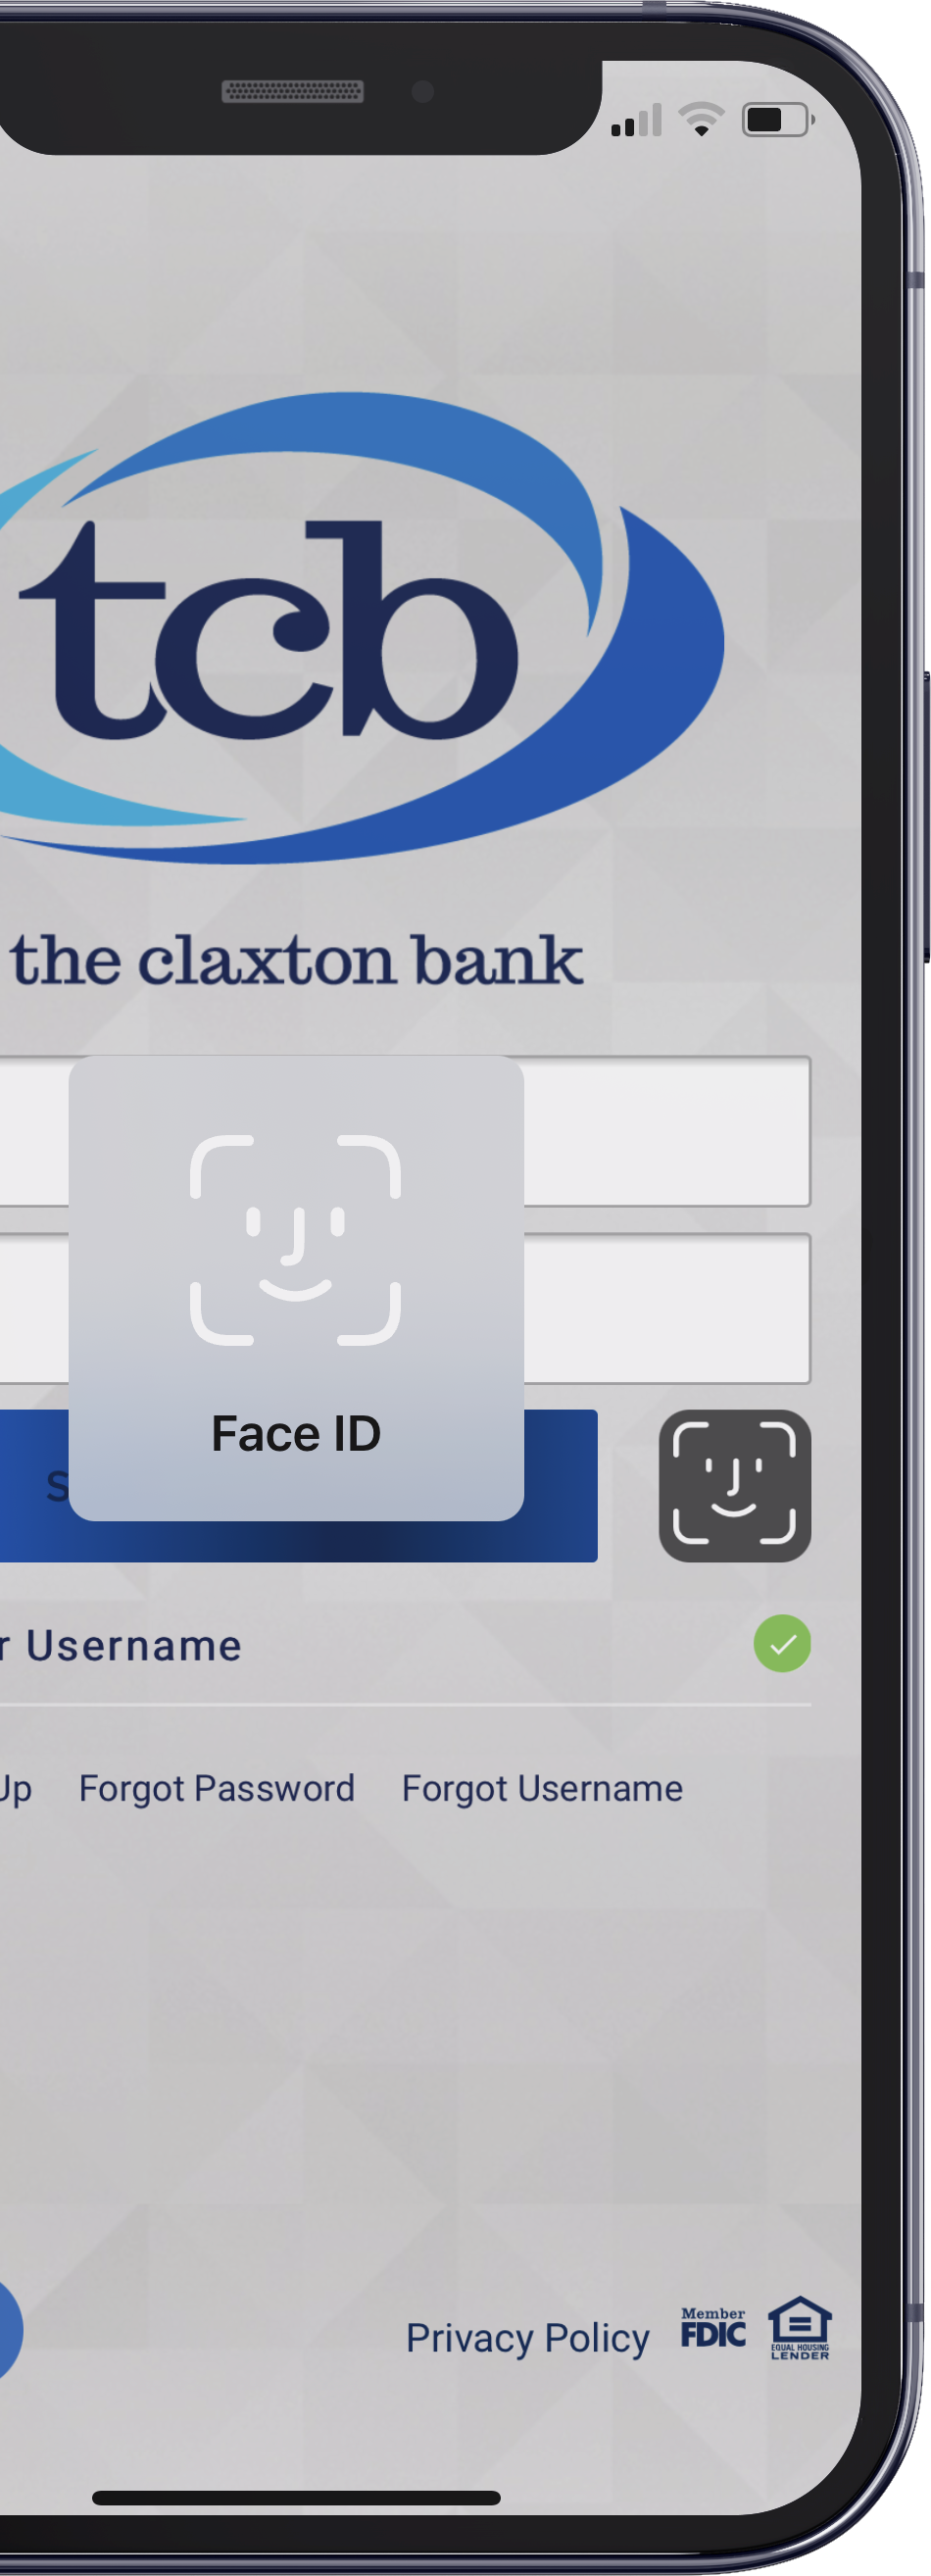 TCB Digital Banking with Face ID